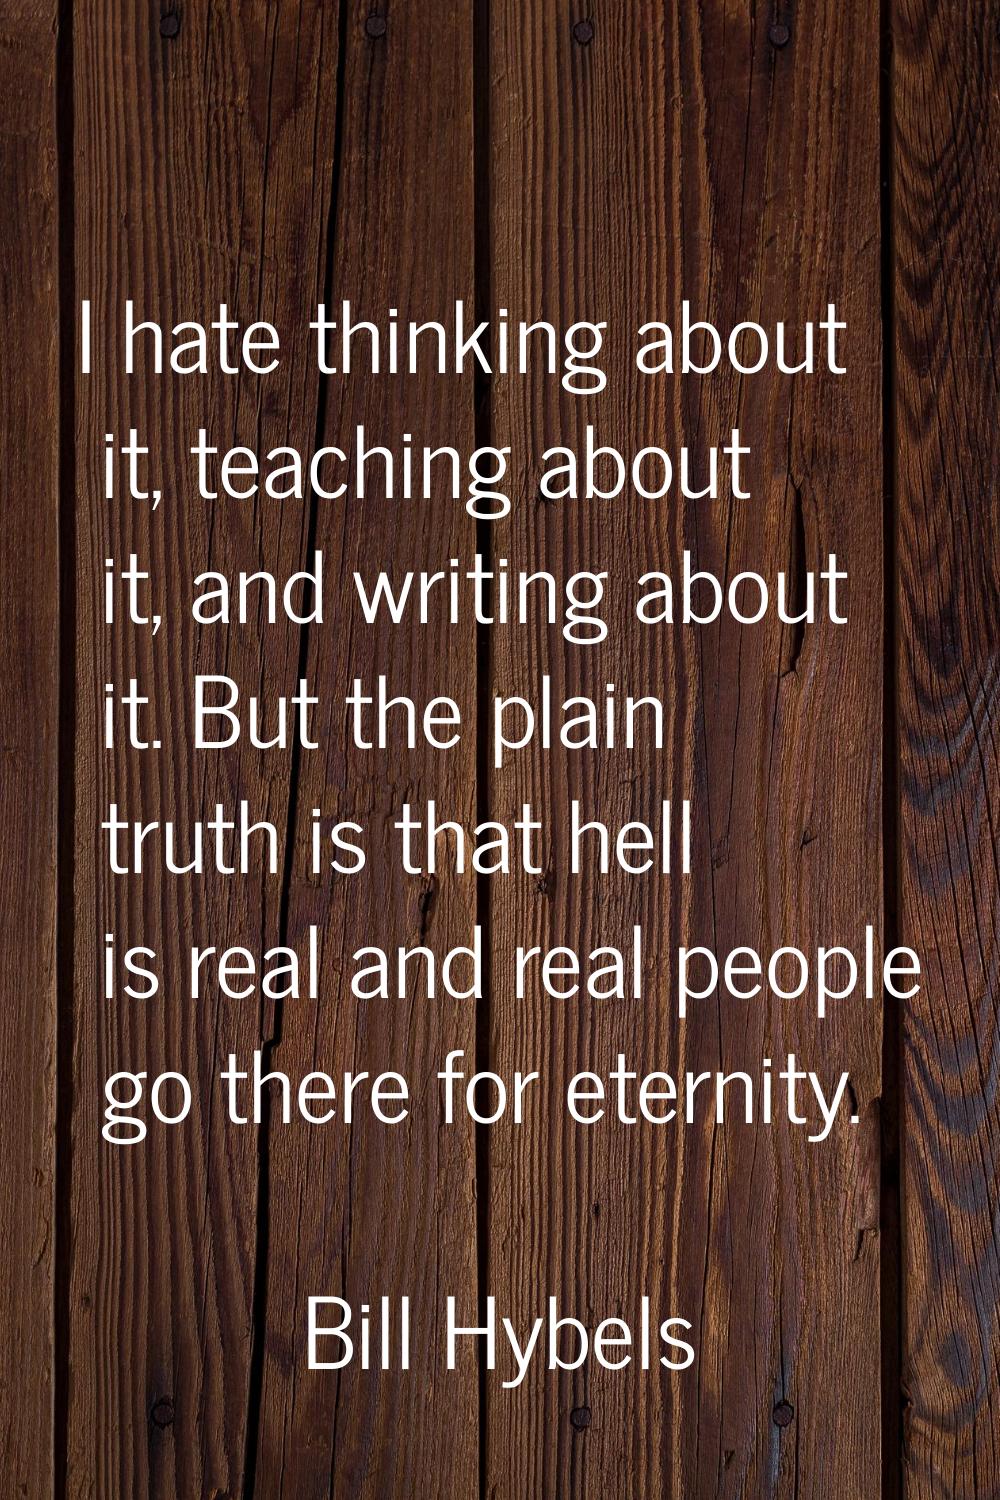 I hate thinking about it, teaching about it, and writing about it. But the plain truth is that hell